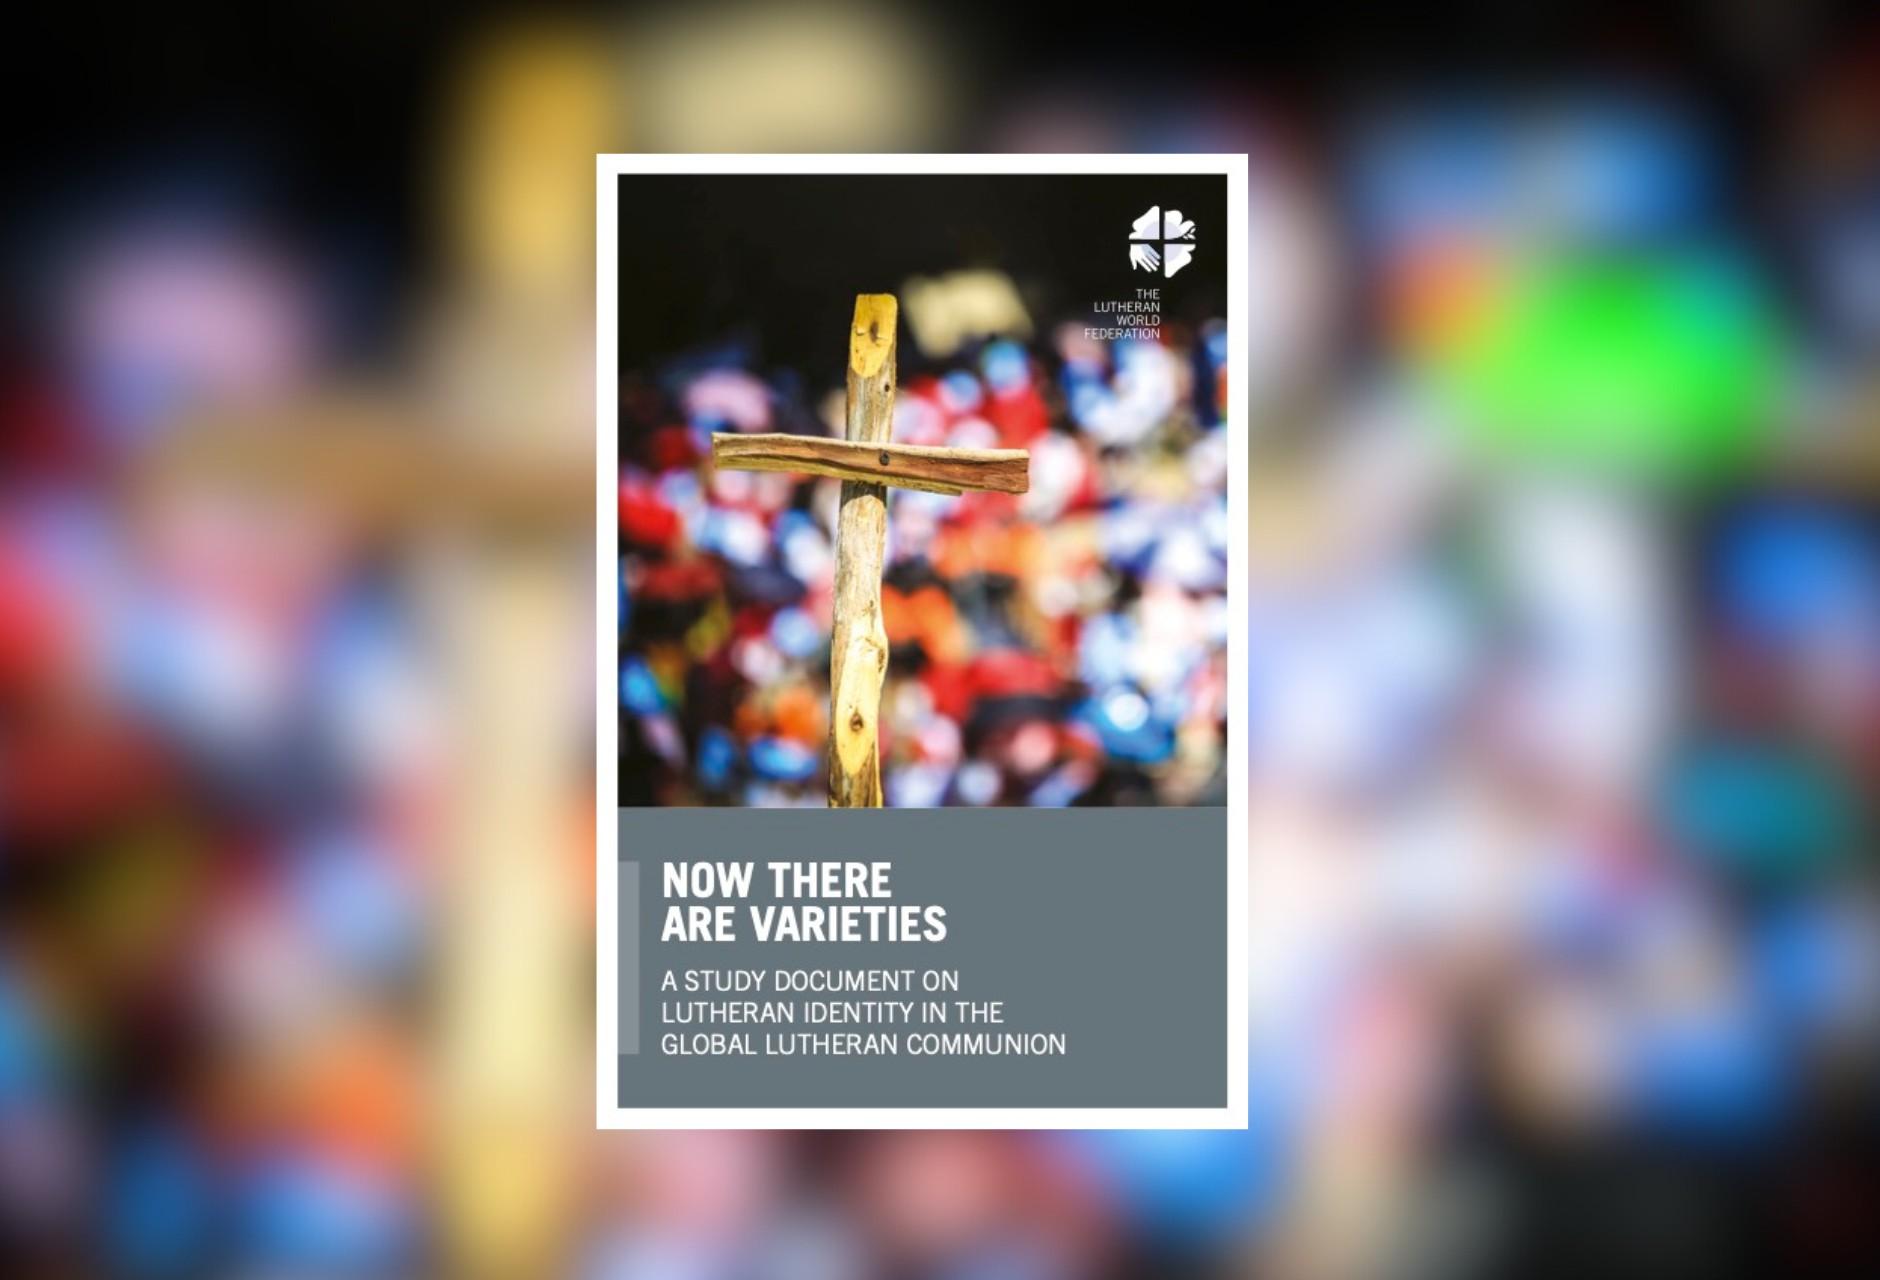 Now there are varieties - A study document on Lutheran Identity in the global Lutheran communion